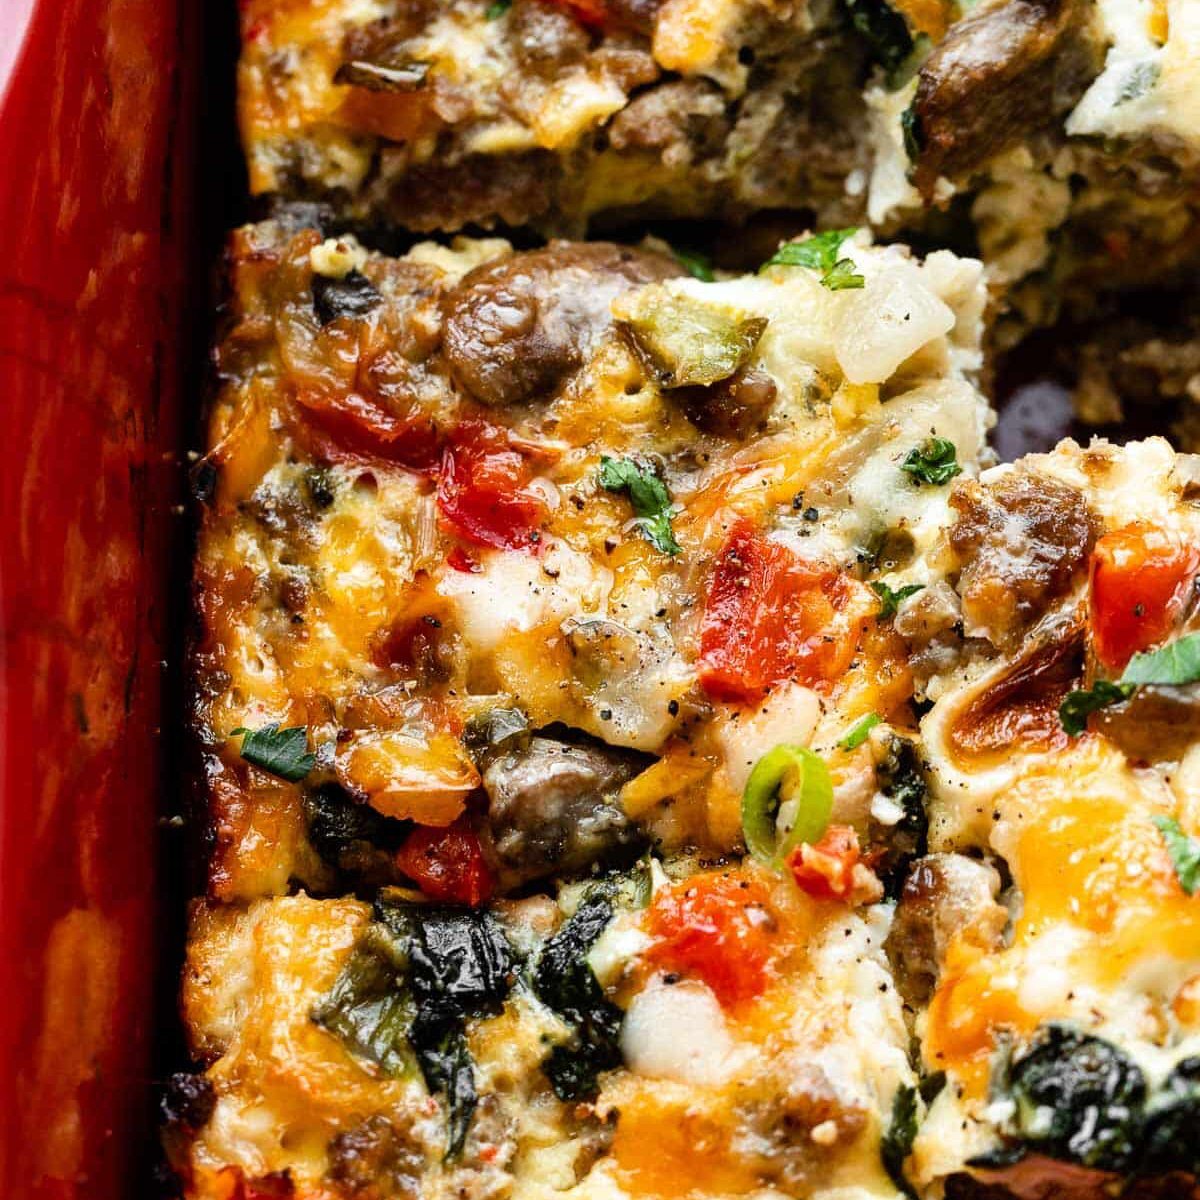 It's recipe time! My New Years resolution in January was to find ways to make things a little easier. My favorite way so far? Breakfast casserole! I make a big breakfast casserole on Sundays and it makes eating a balanced, nutrient-dense breakfast ev